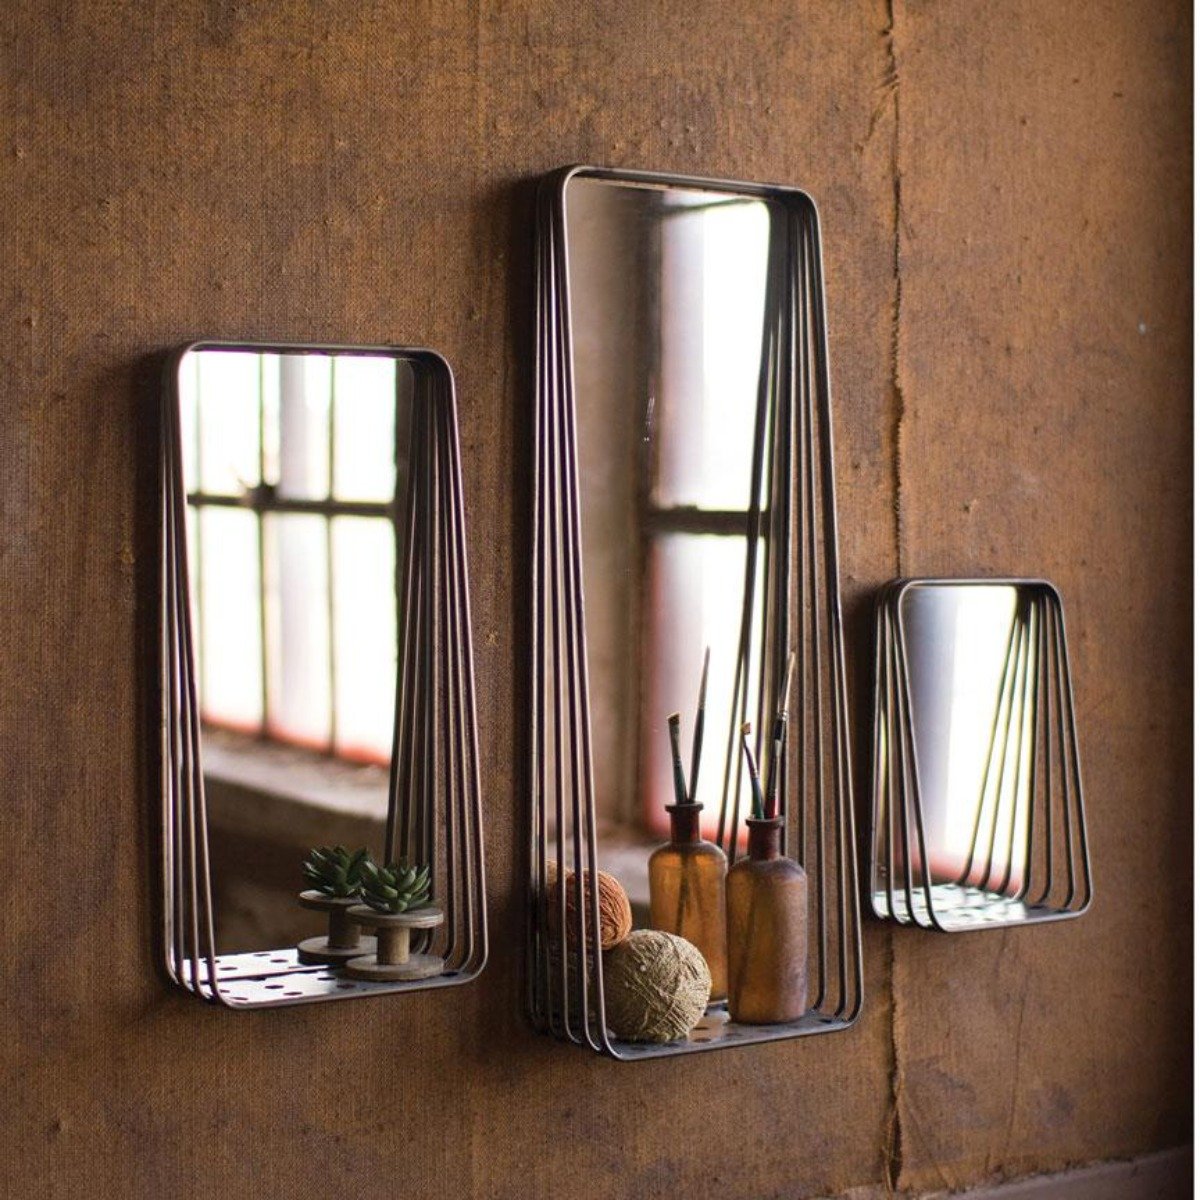 Tall Mirrors Shelves (Set-3)-Wall | Iron Accents